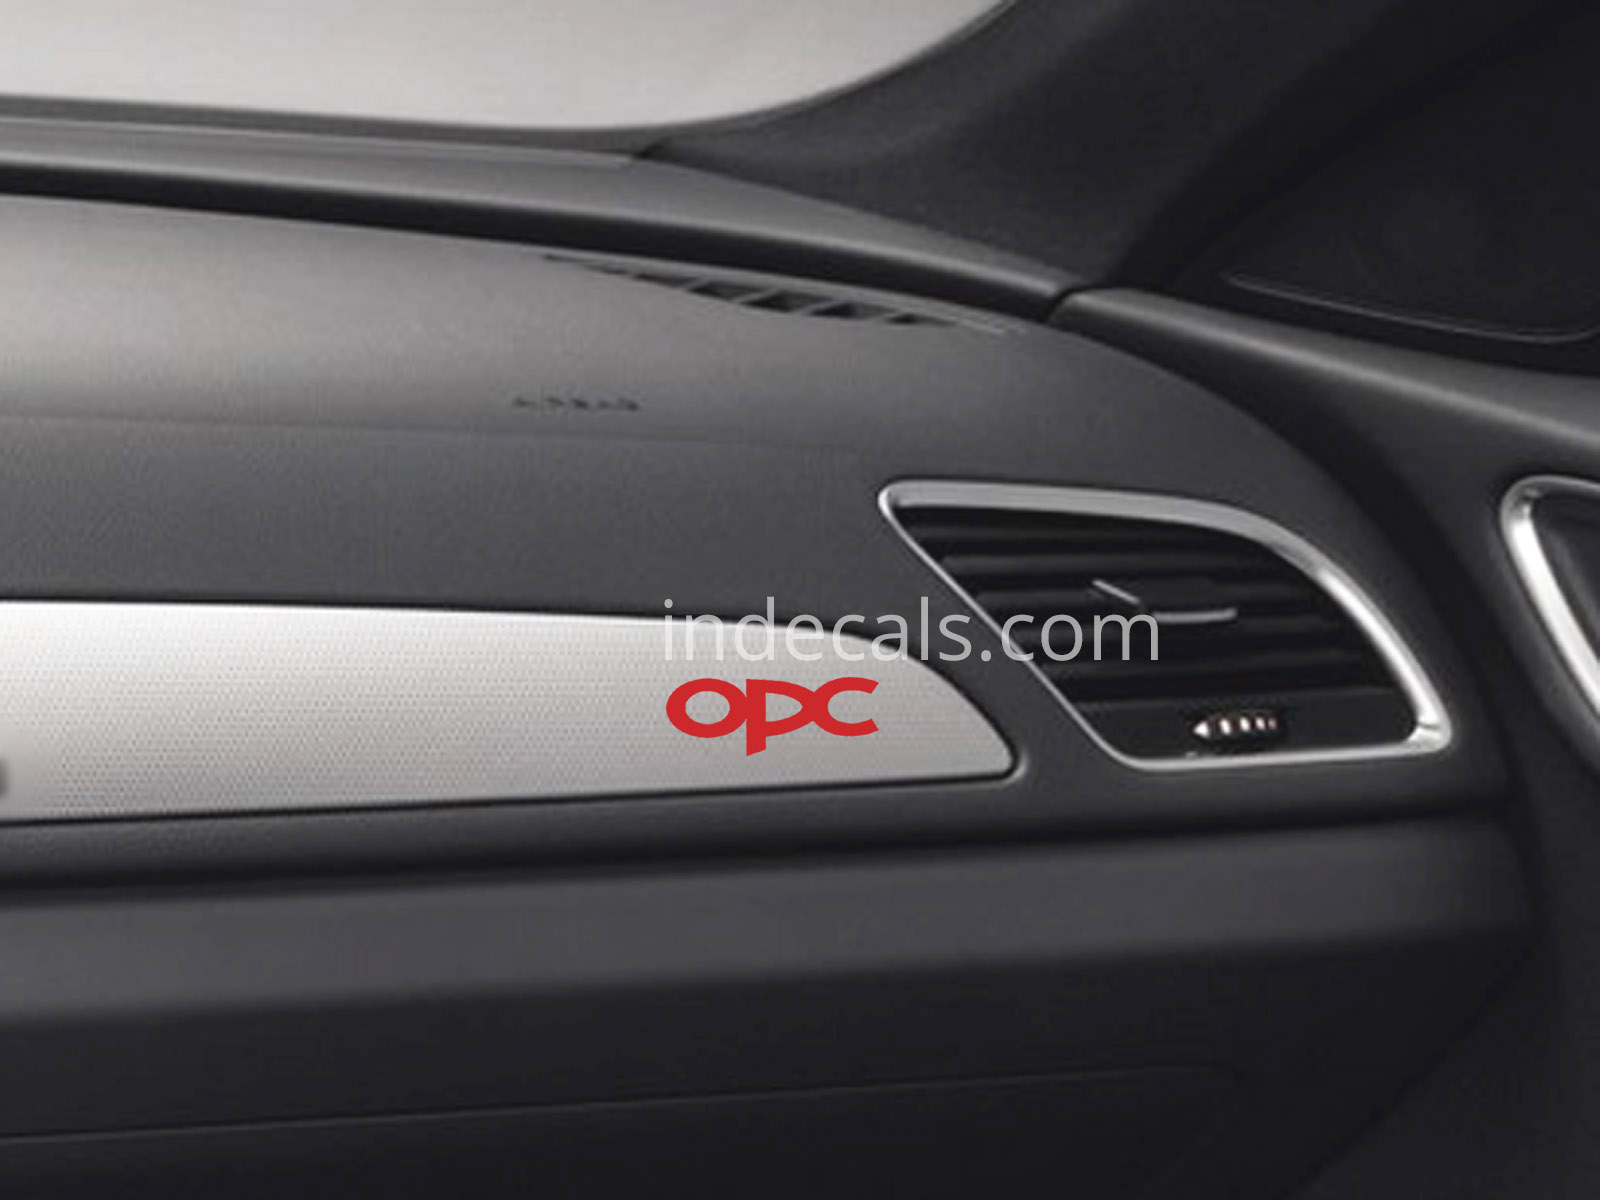 3 x Opel OPC Stickers for Dash Trim - Red